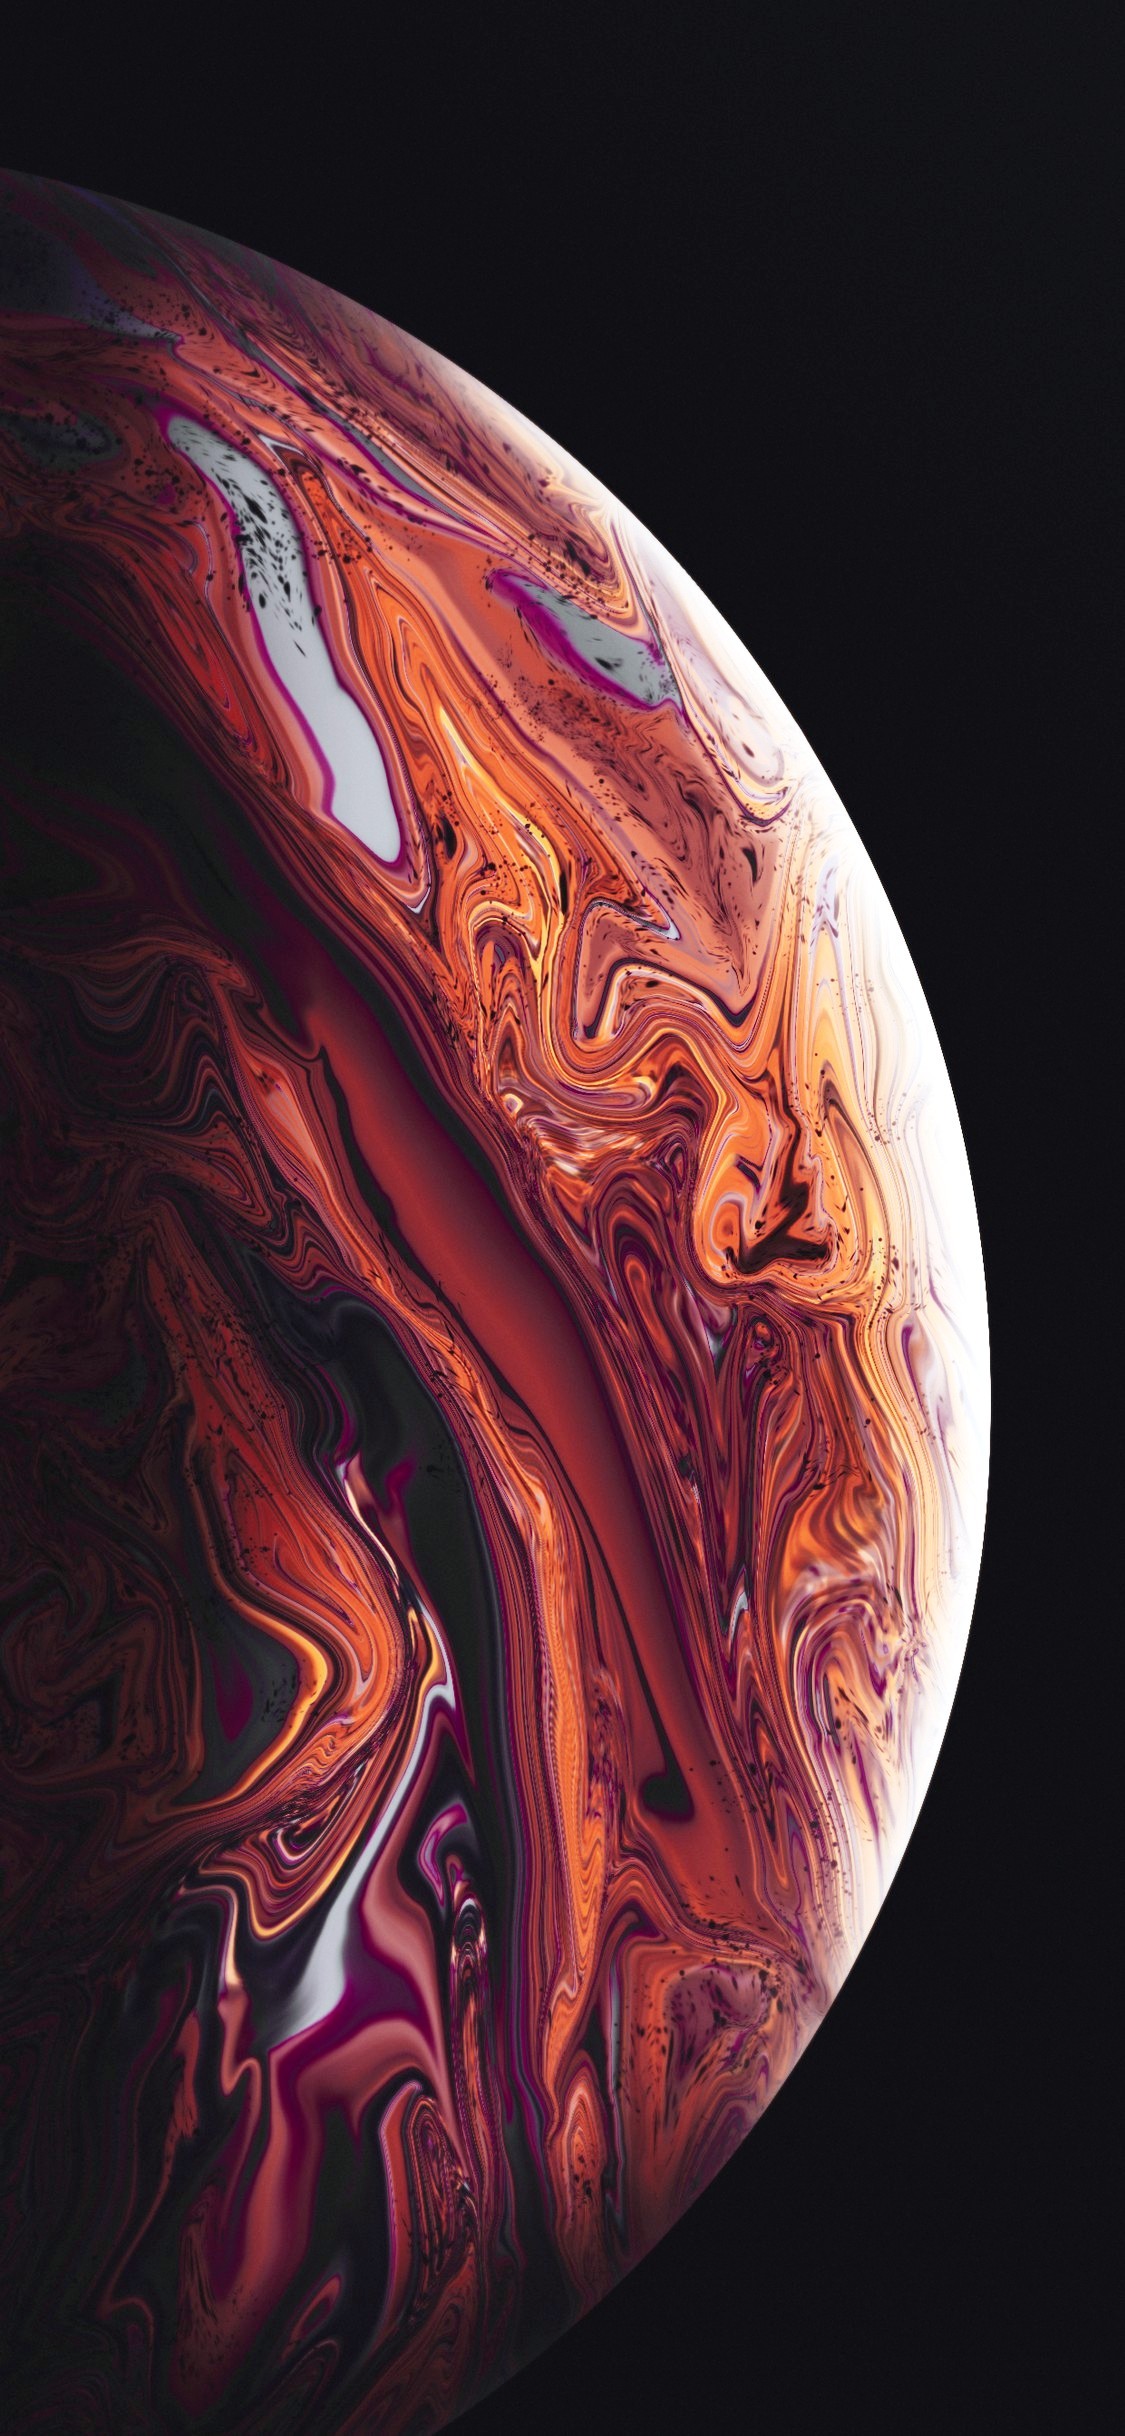 iPhone XS Wallpaper HD with high-resolution 1125x2436 pixel. You can use this wallpaper for your iPhone 5, 6, 7, 8, X, XS, XR backgrounds, Mobile Screensaver, or iPad Lock Screen